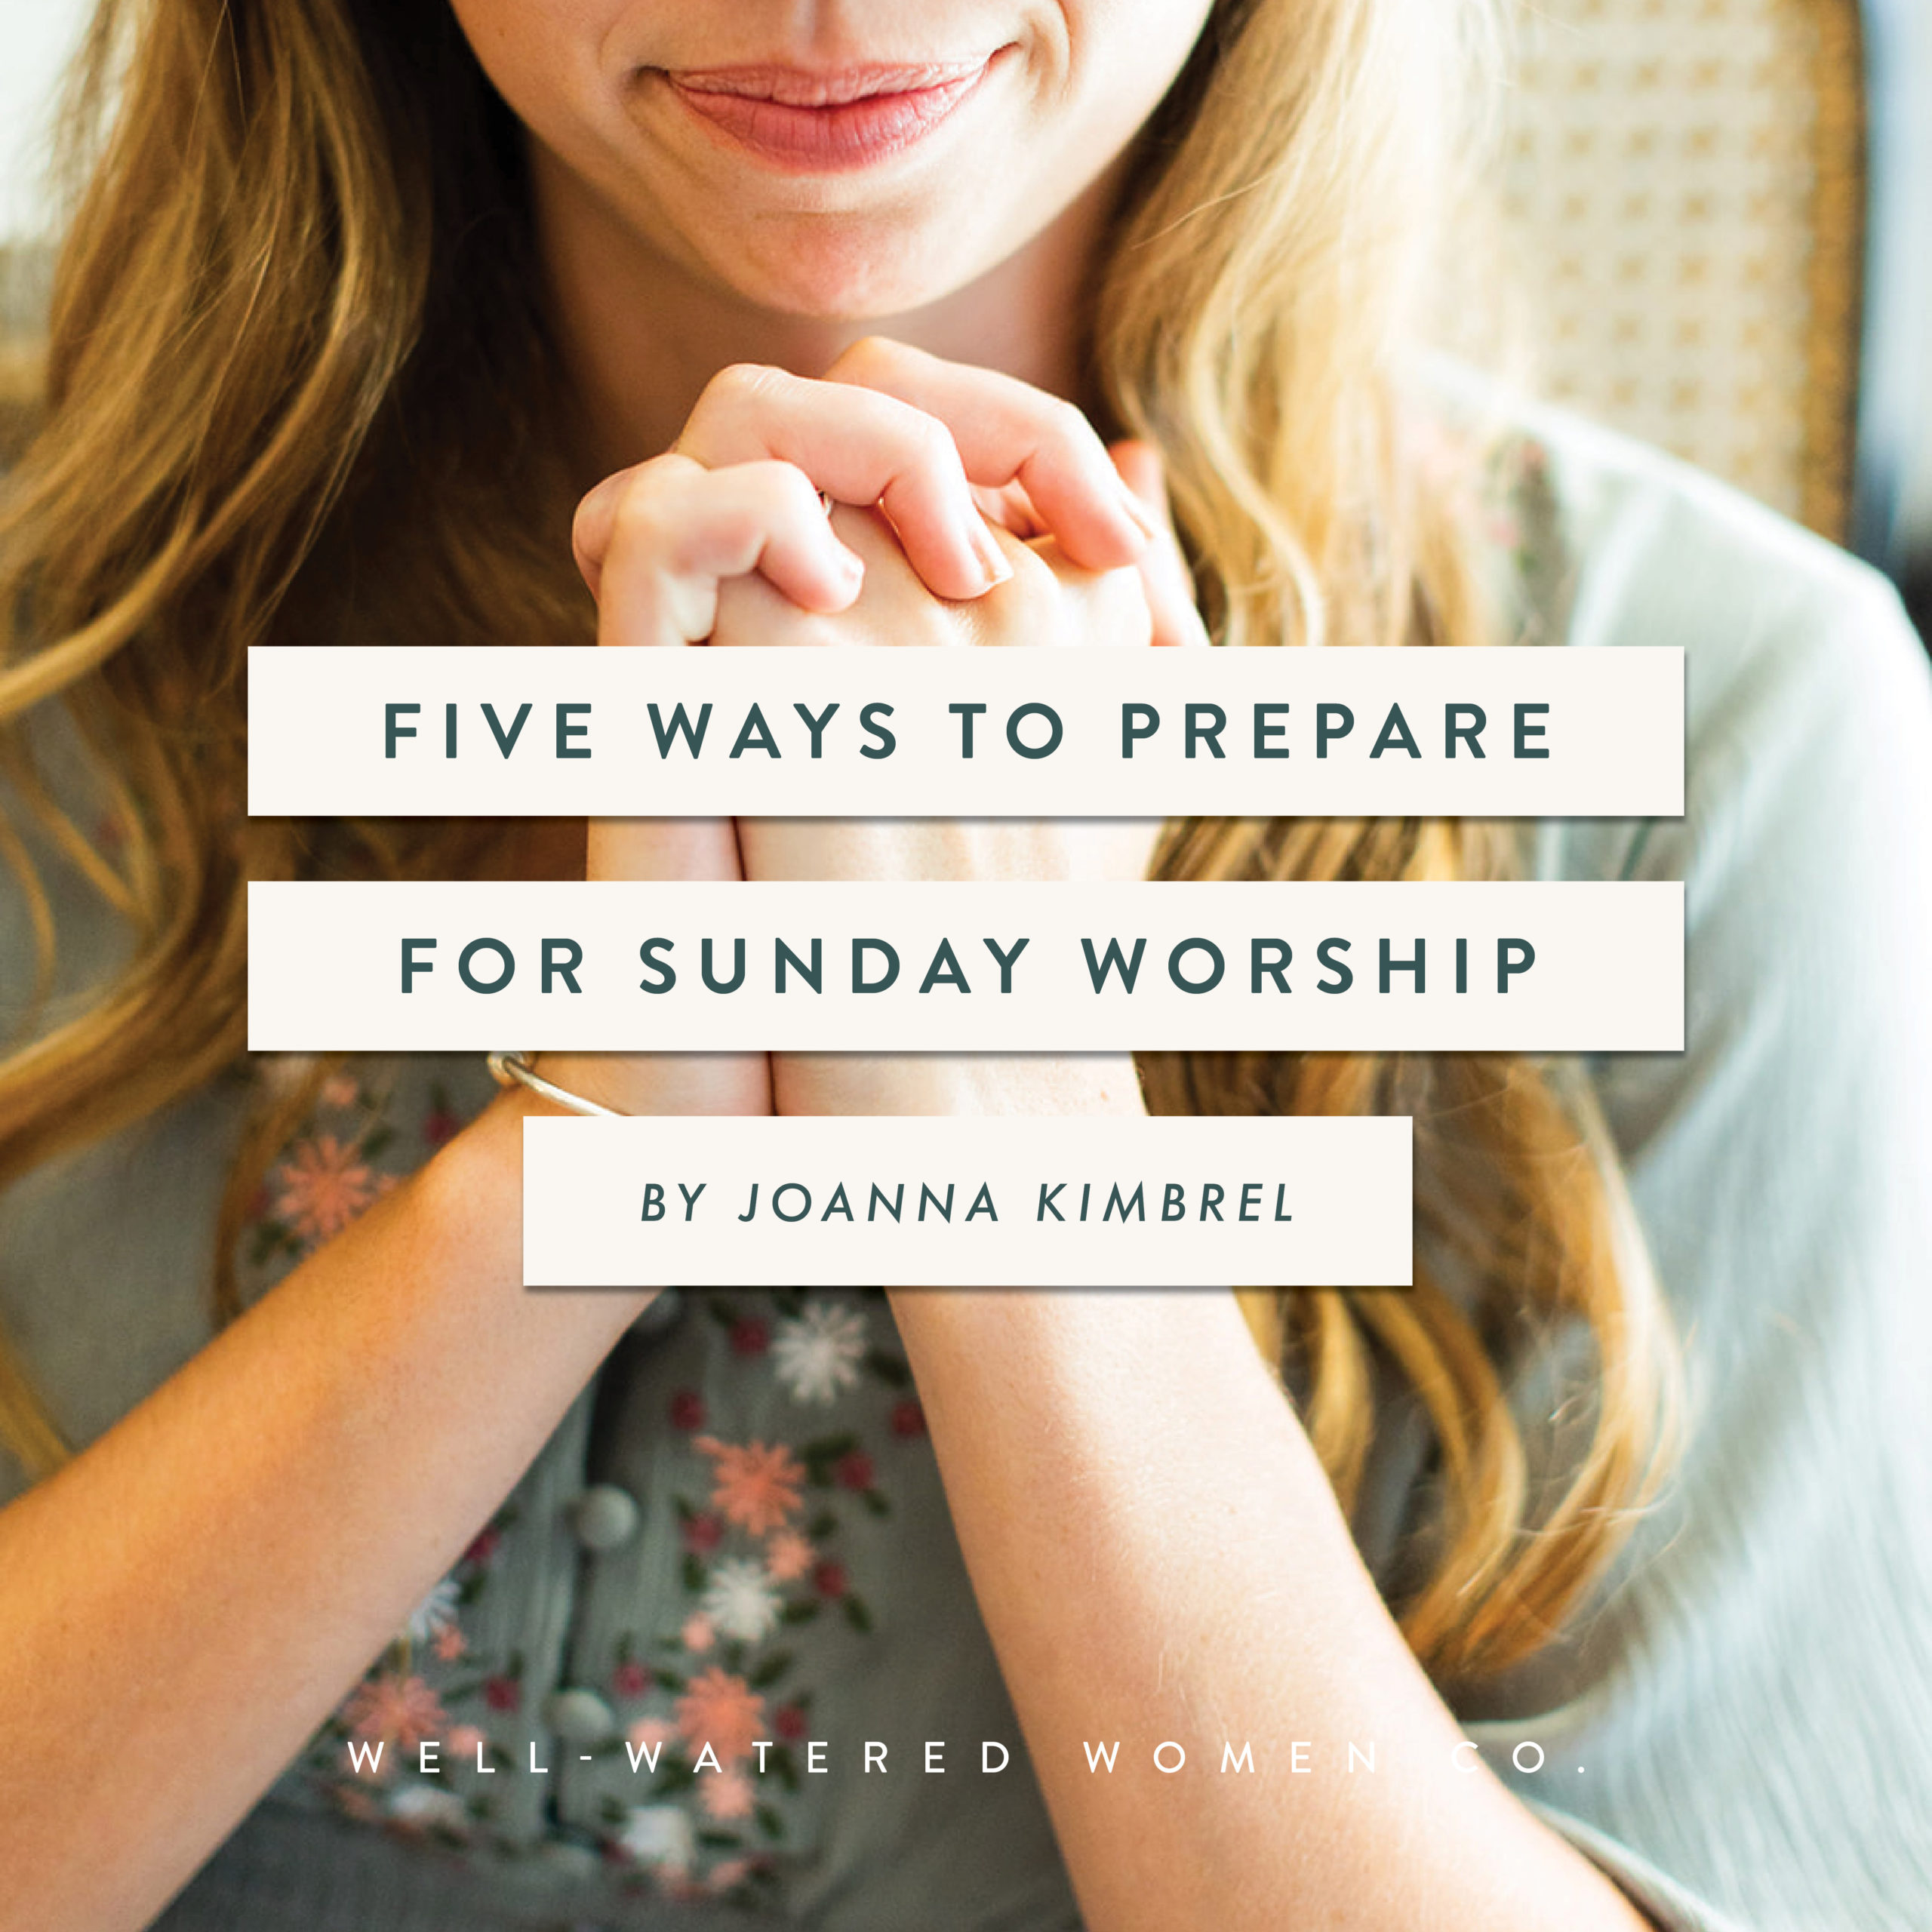 Five Ways to Prepare for Sunday Worship - an Article from Well-Watered Women